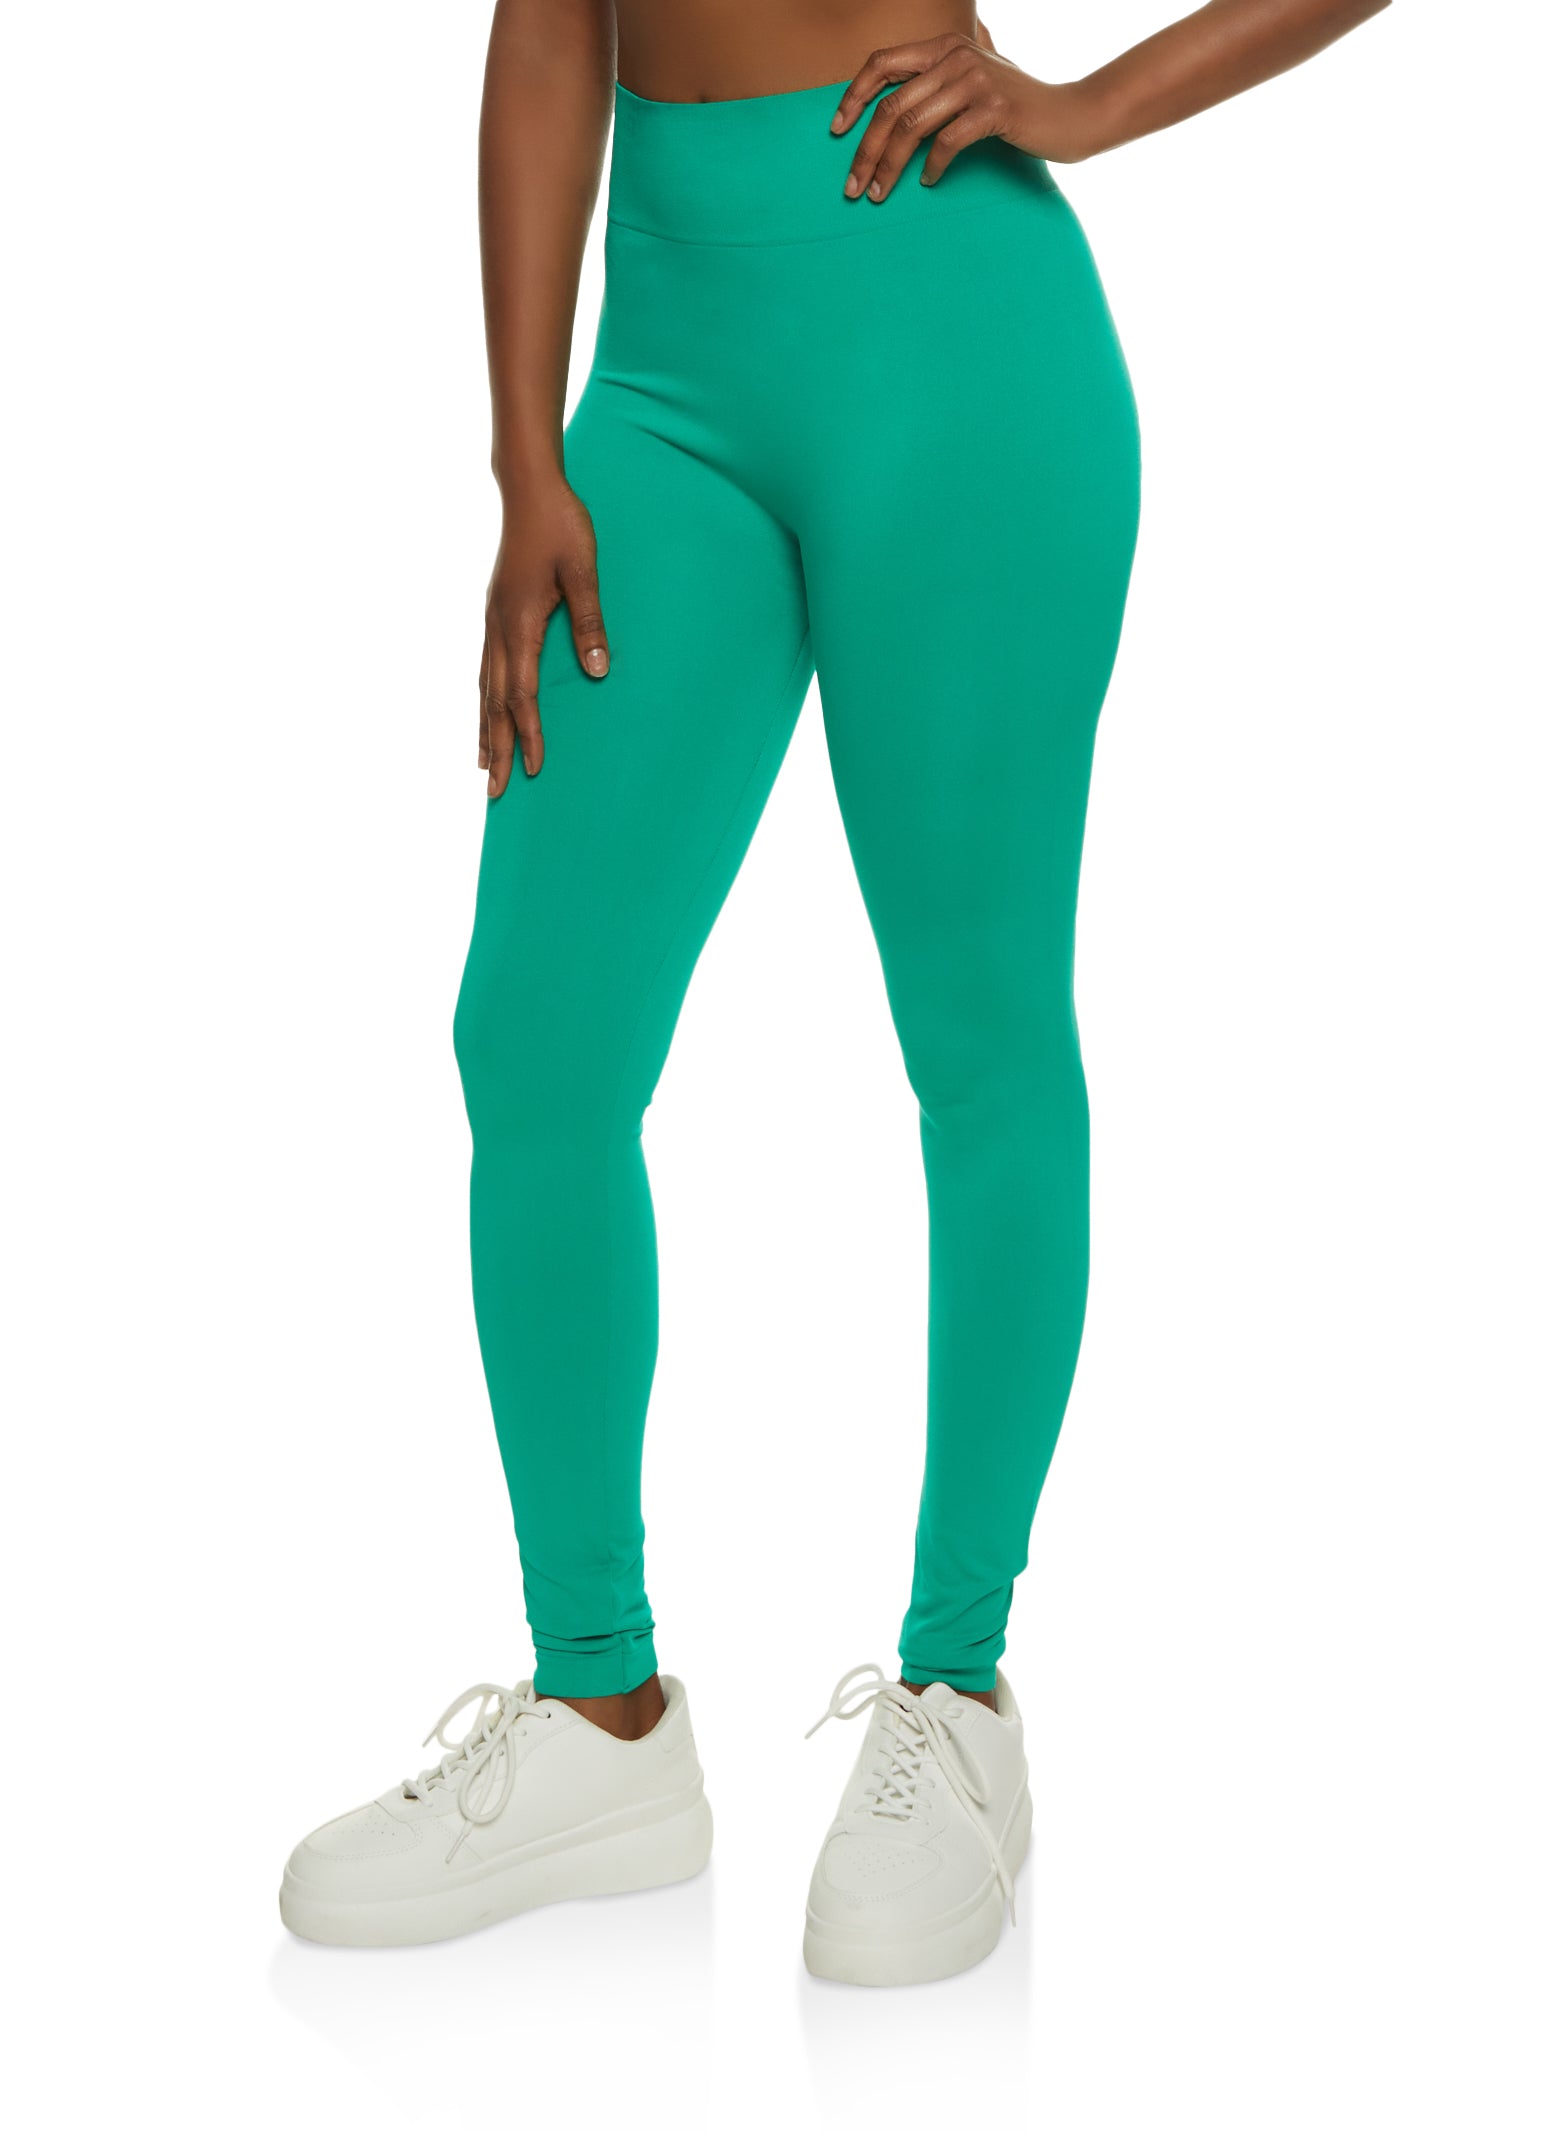 Womens Green Leggings, Everyday Low Prices